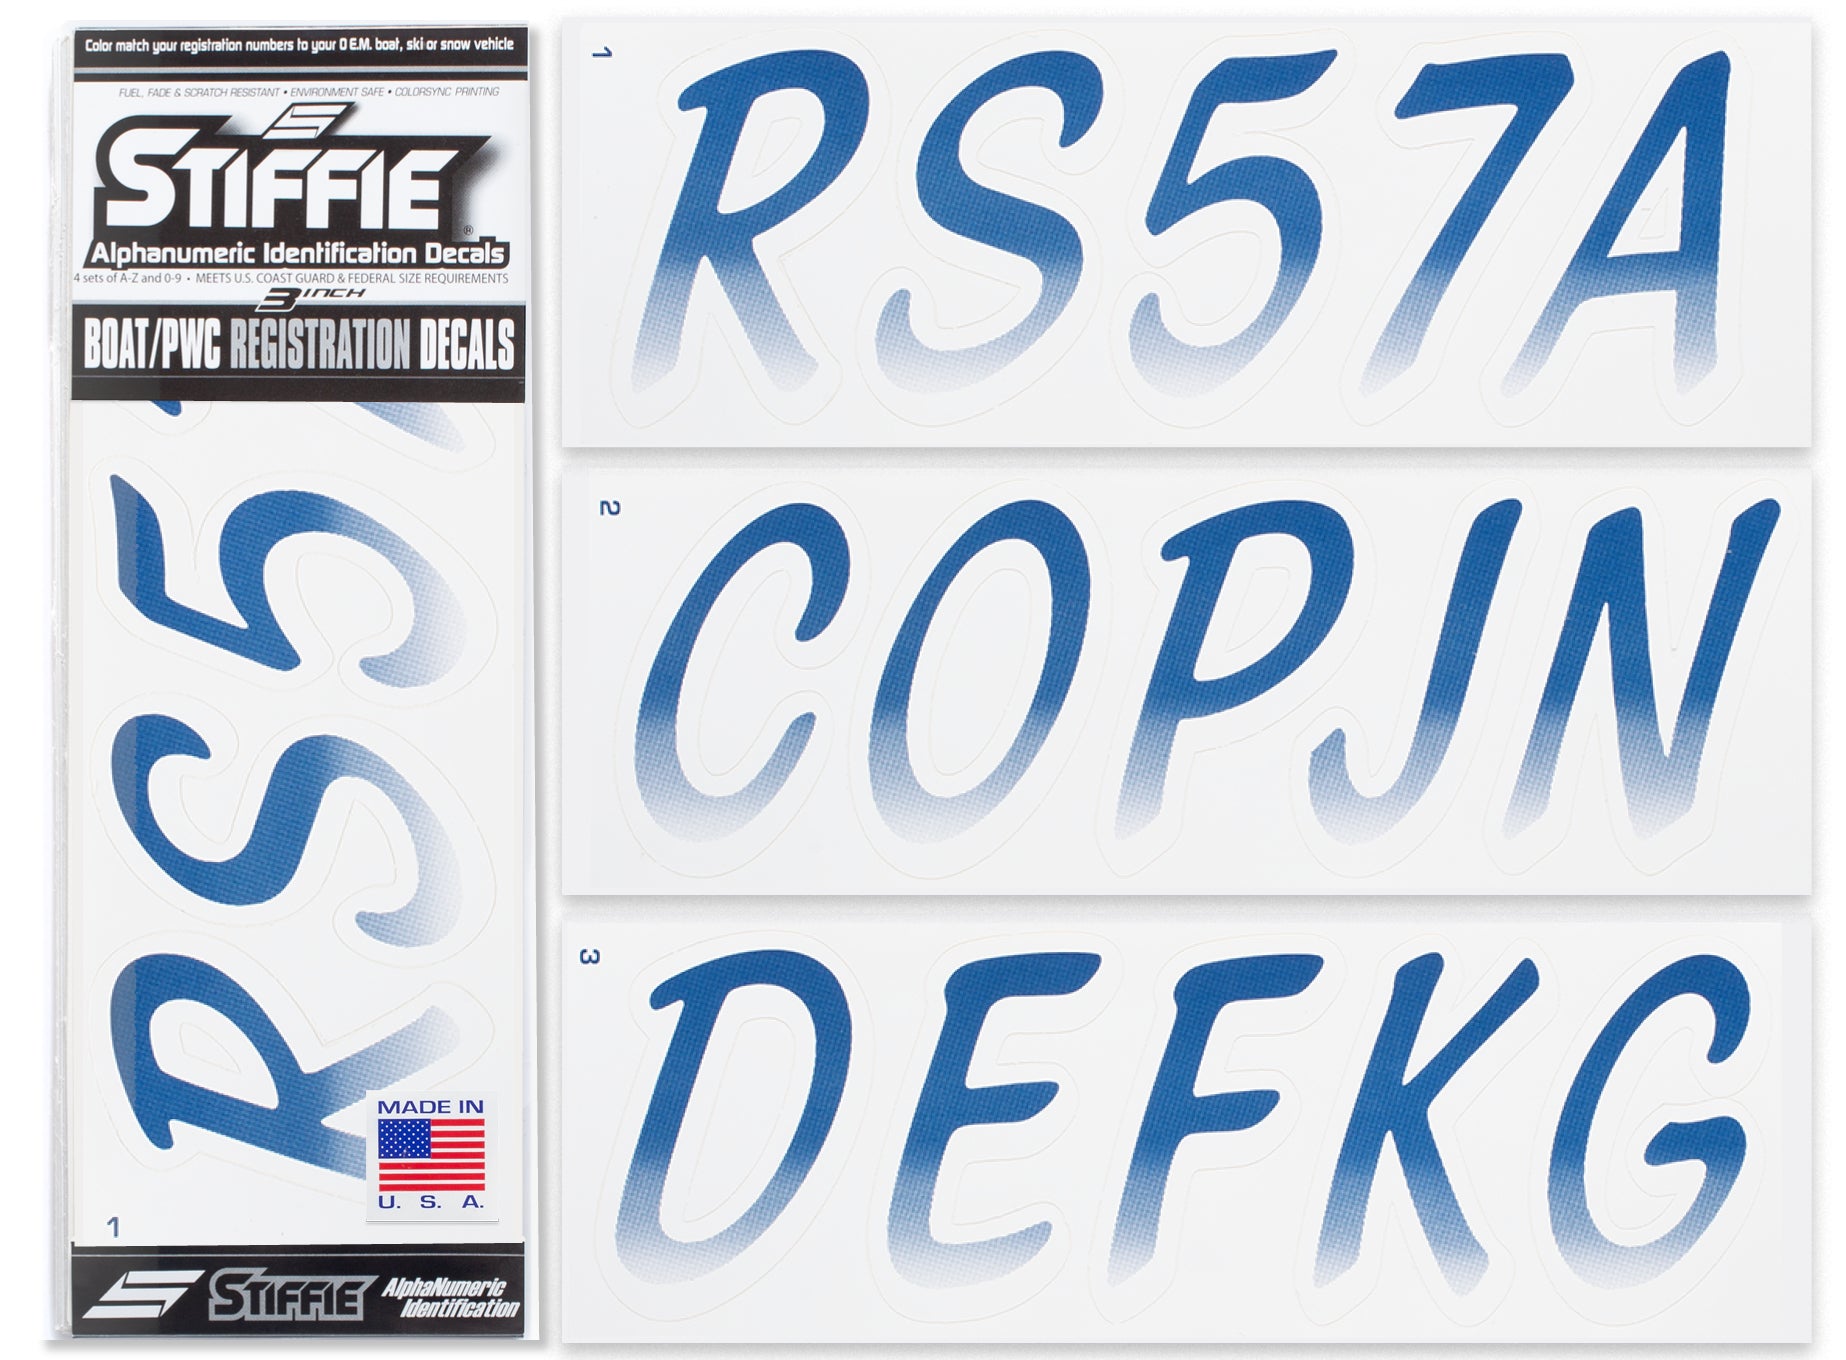 STIFFIE Whipline Navy/White 3" Alpha-Numeric Registration Identification Numbers Stickers Decals for Boats & Personal Watercraft